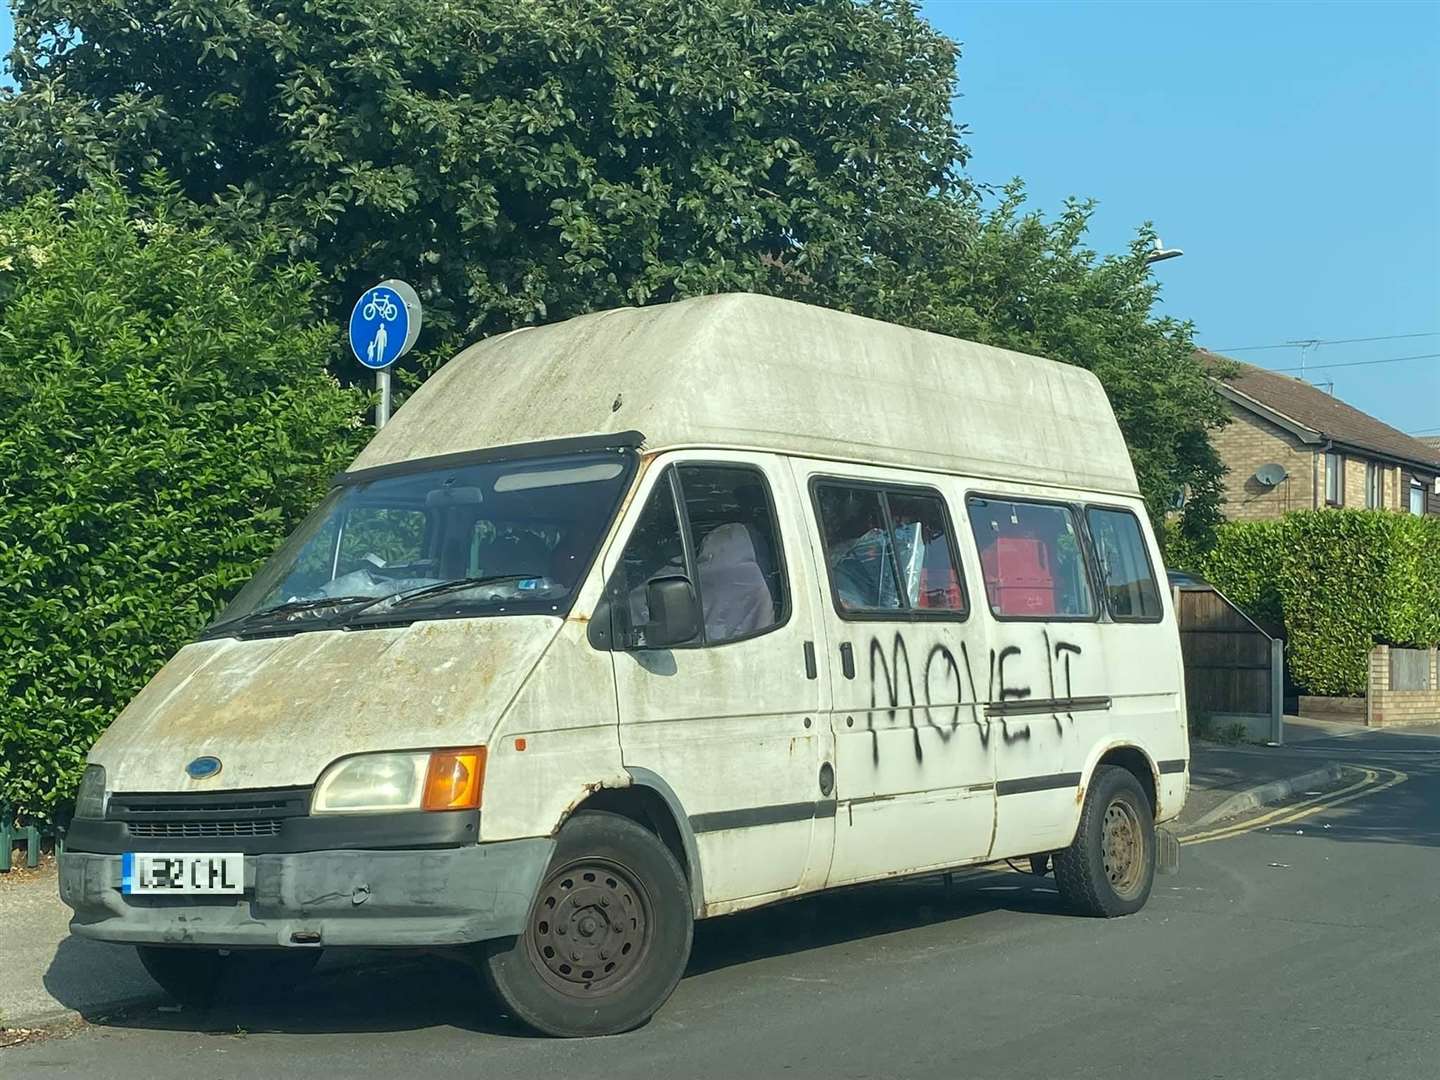 'Abandoned' van in Sheerness with 'Move it' spray painted on its side. Picture: Darren Jamie Atkins